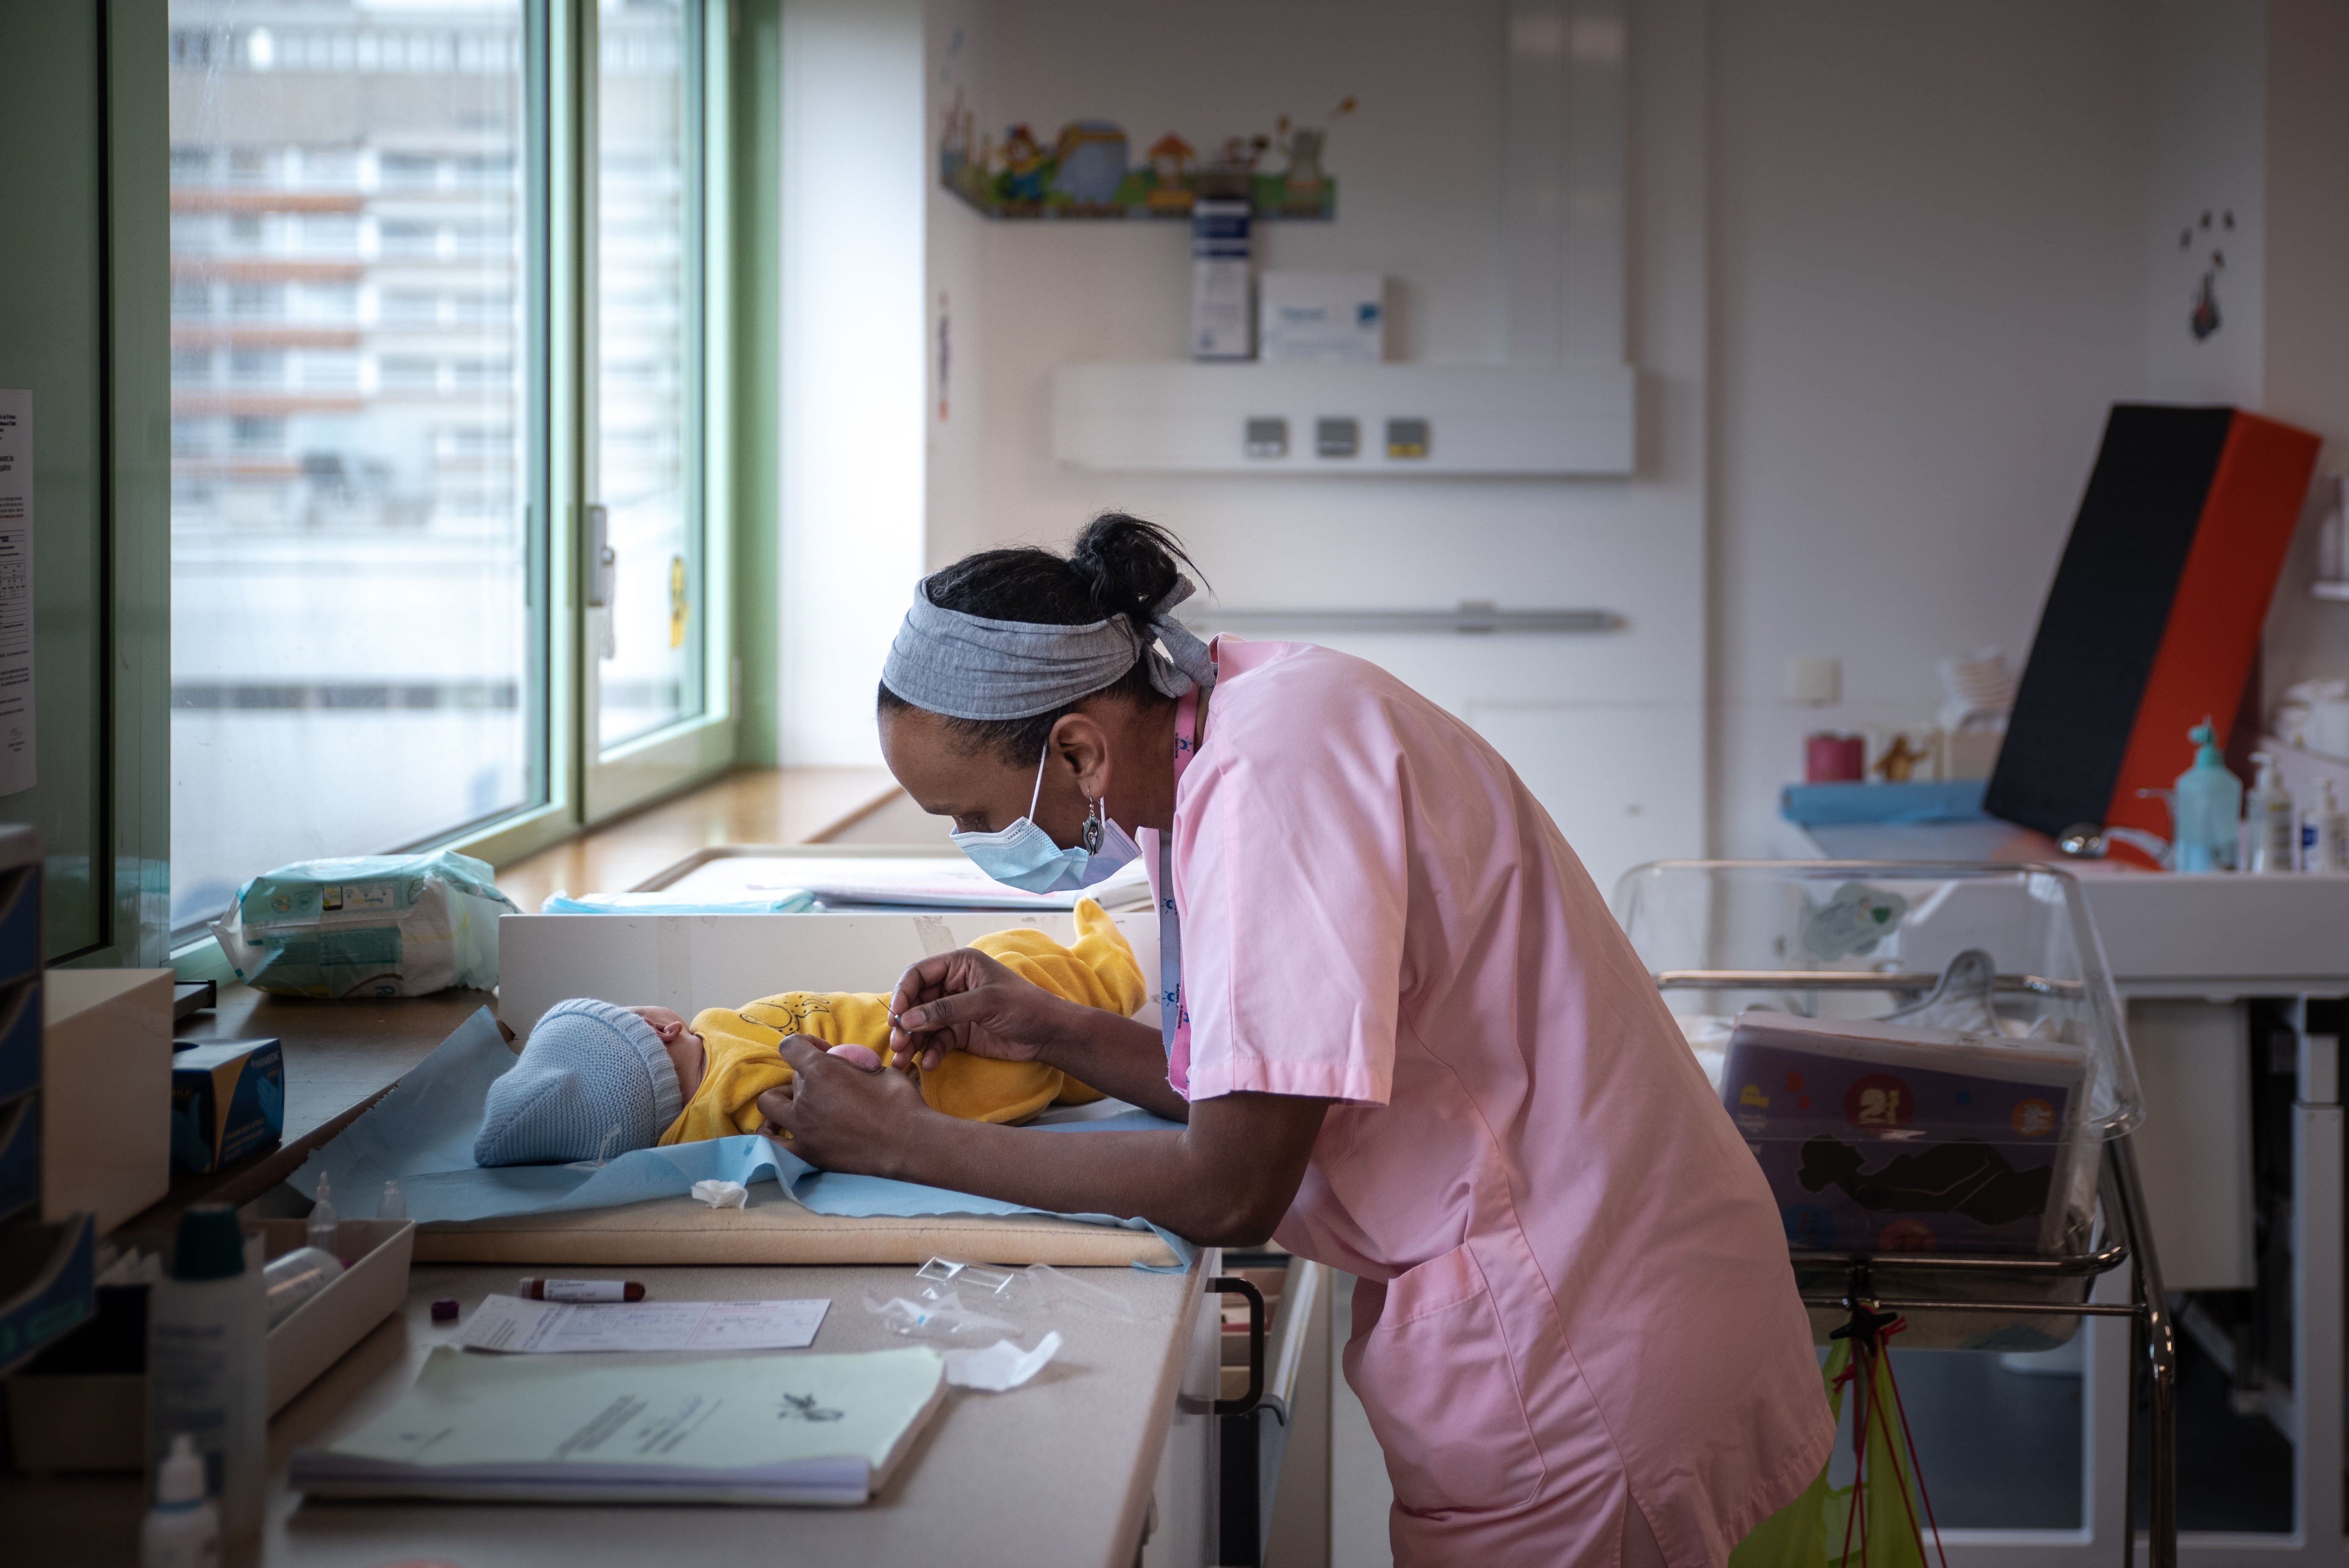 A midwife attends to a newborn baby at a hospital in Saint-Denis, Paris, in February